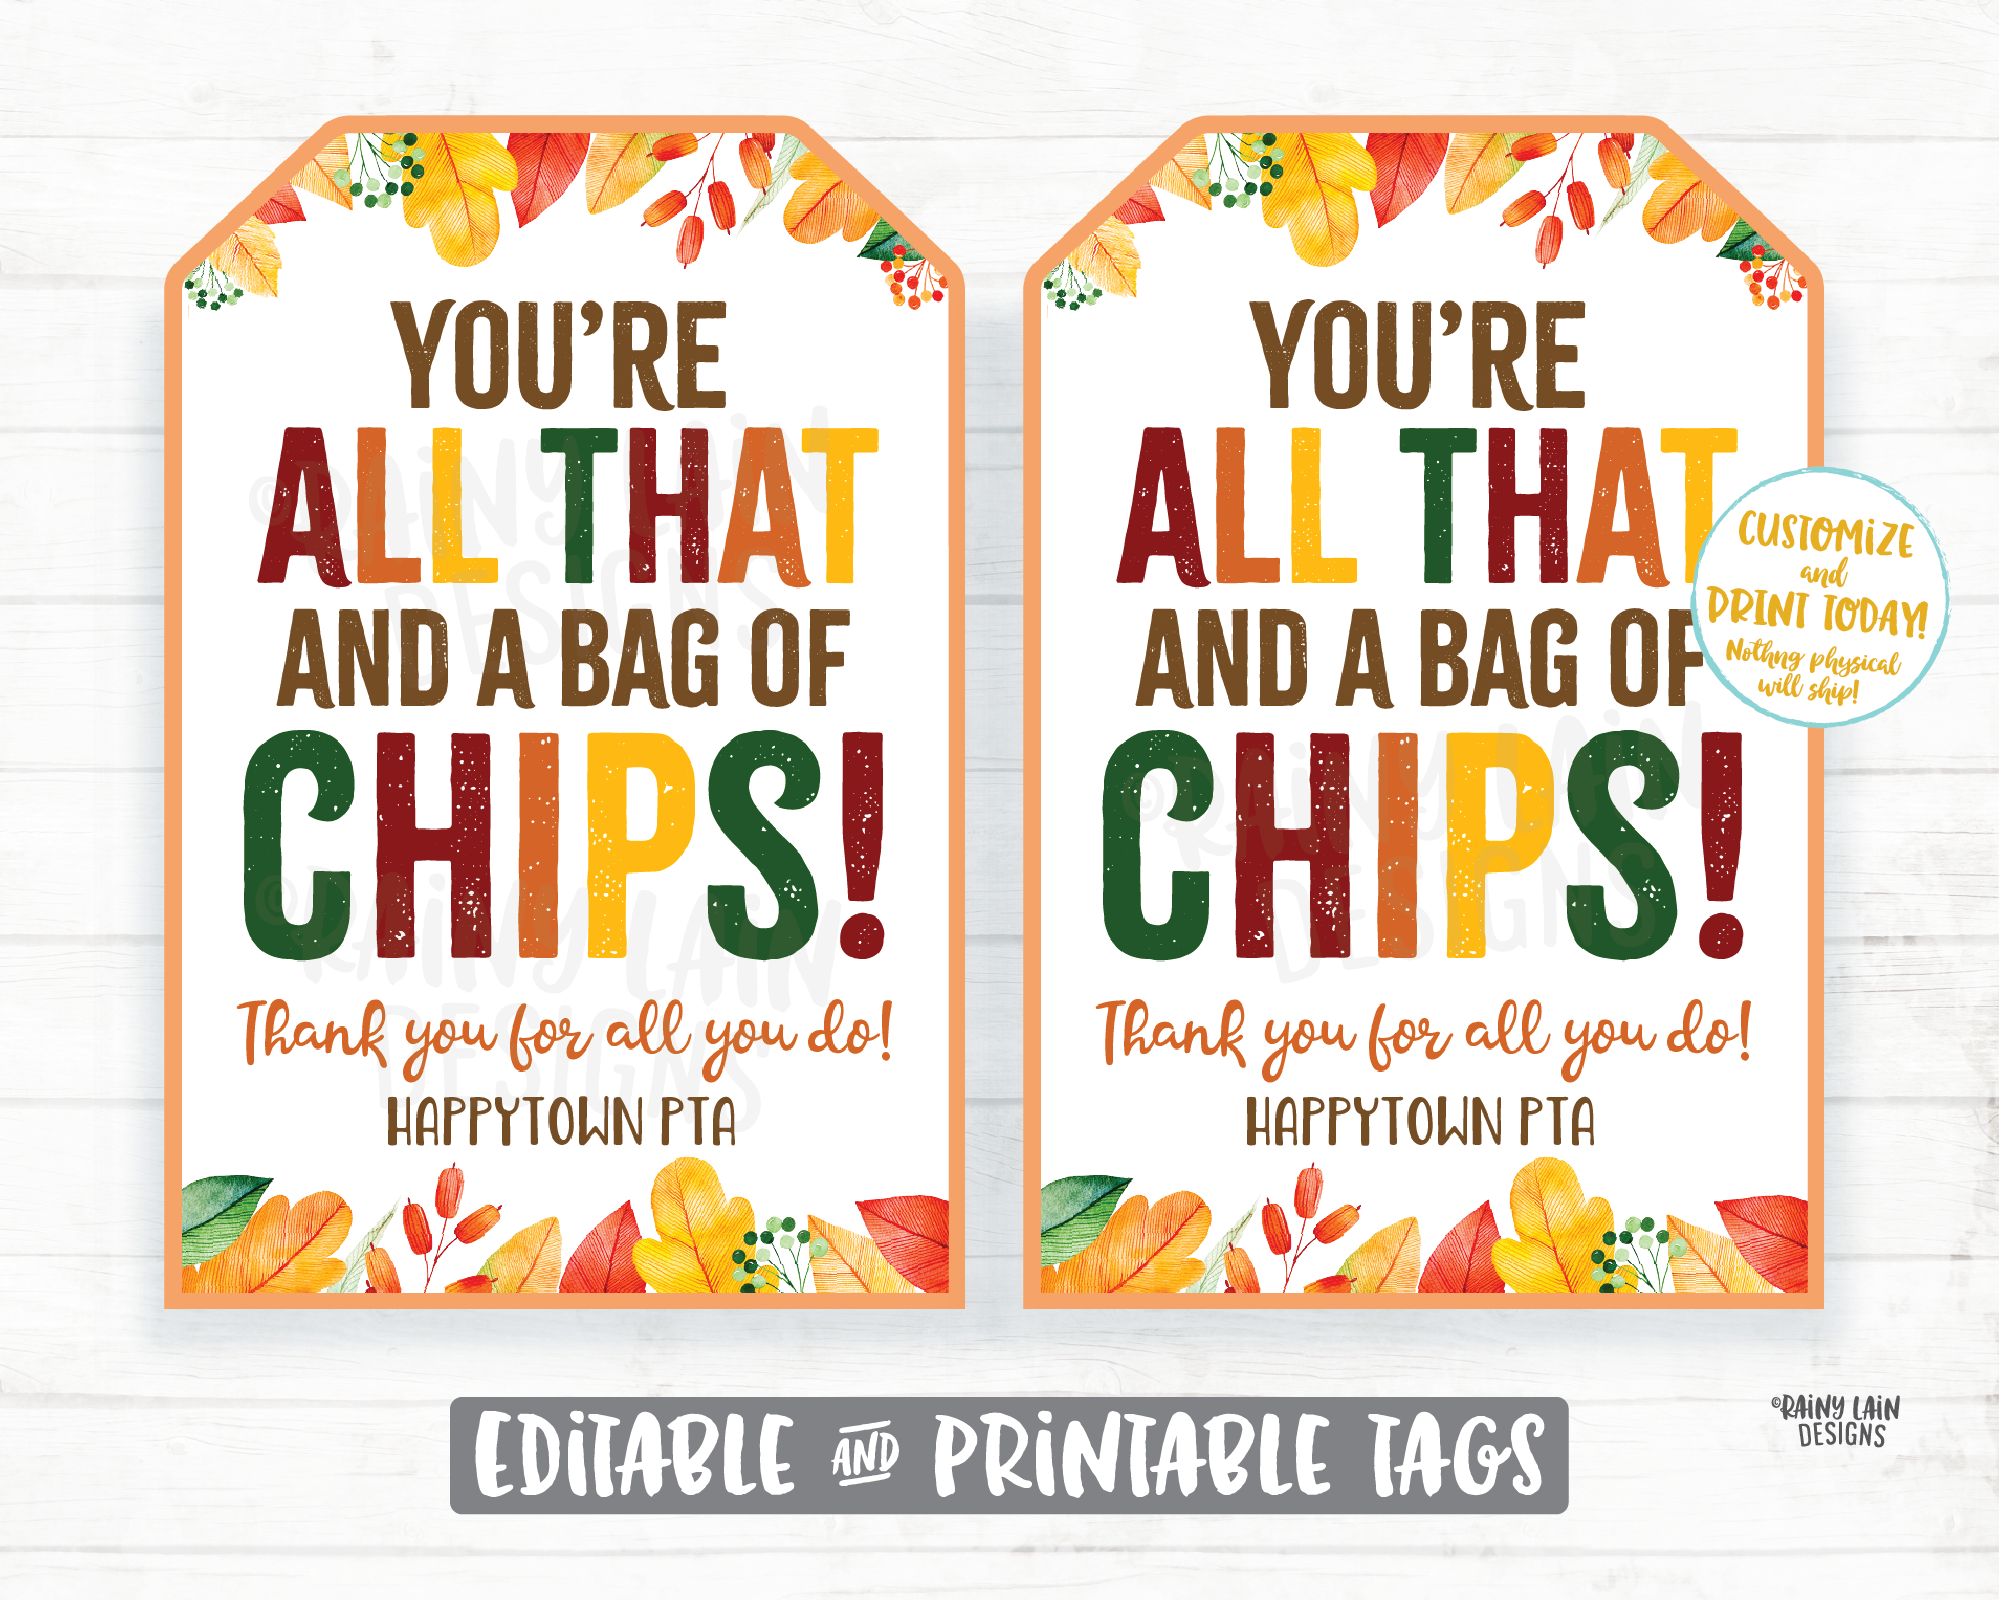 You're all that and a bag of chips Fall Gift Tag Employee Appreciation Tag Company Frontline Essential Worker Staff Corporate Teacher PTO